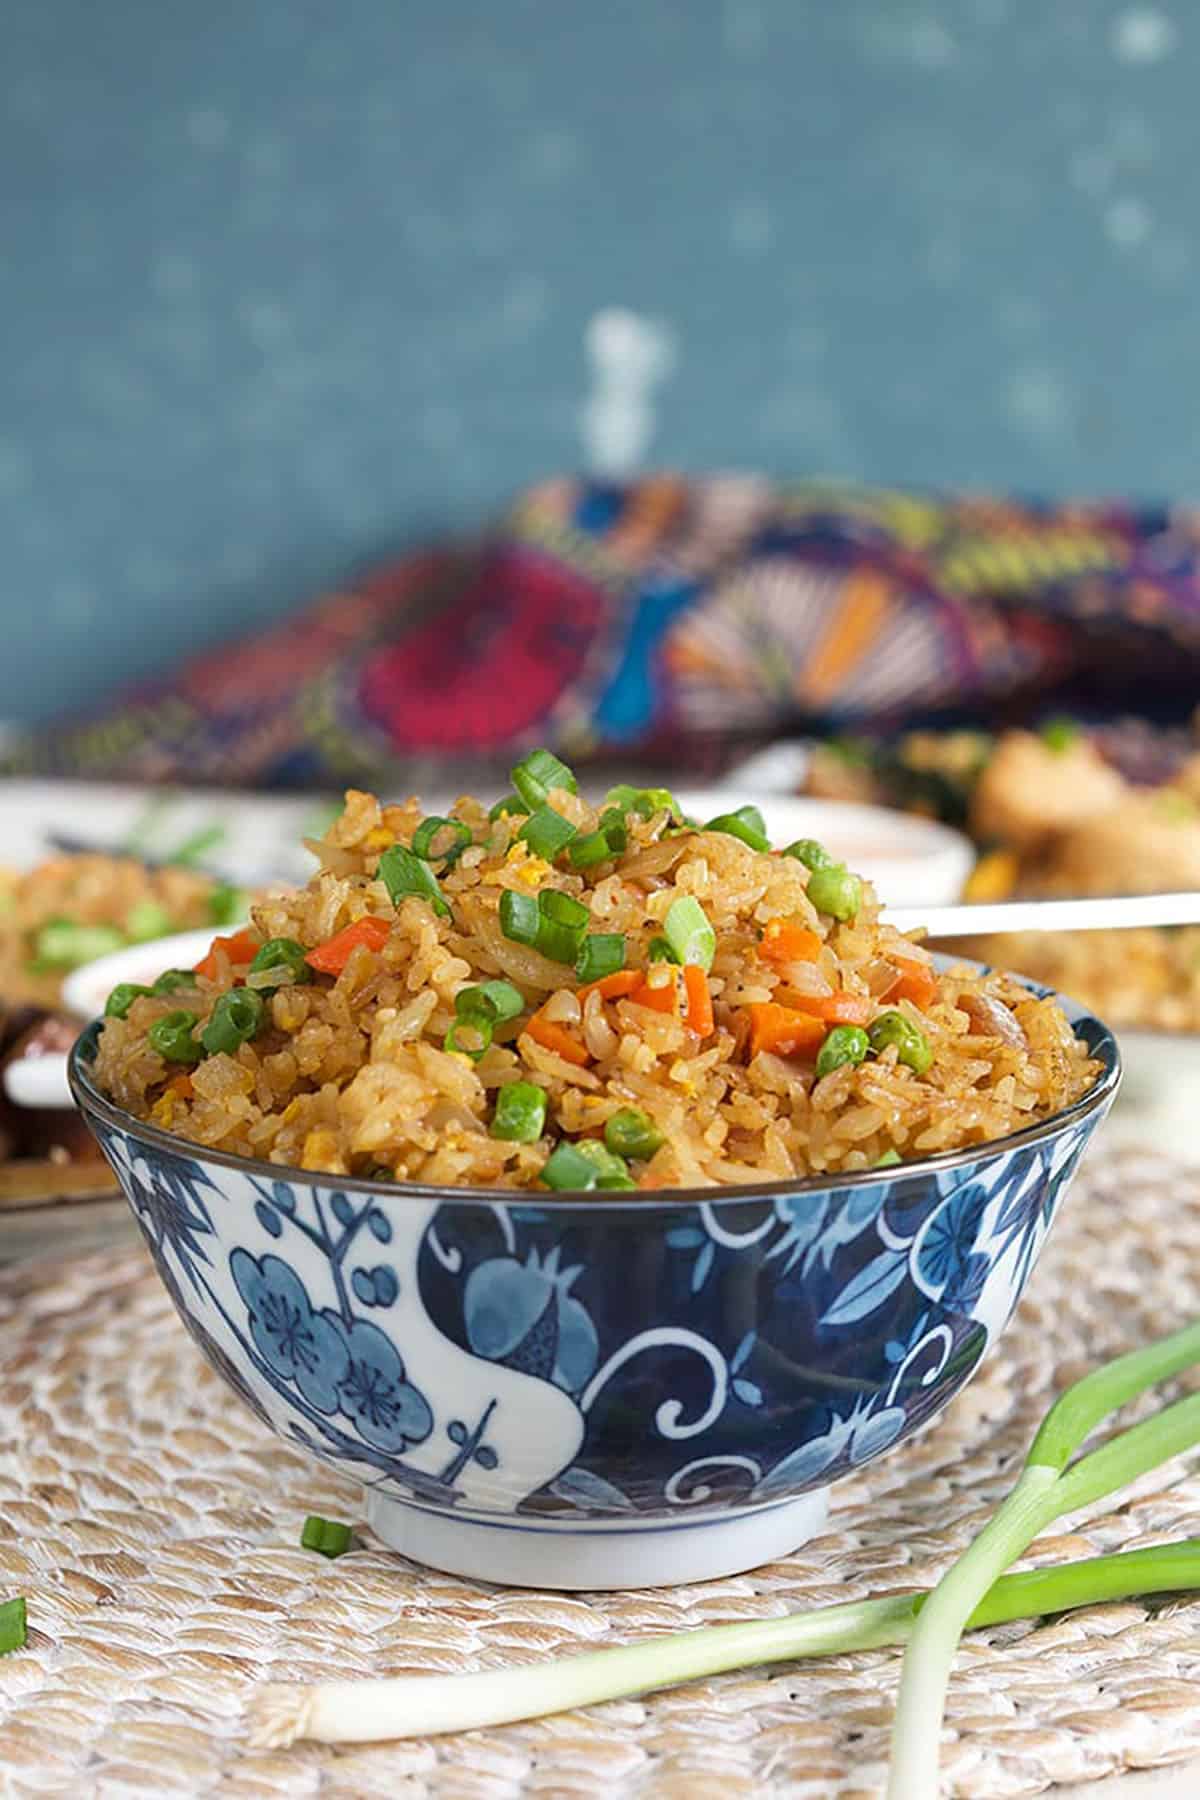 Simple Instant Pot Fried Recipe - Hibachi Style Fried Rice in